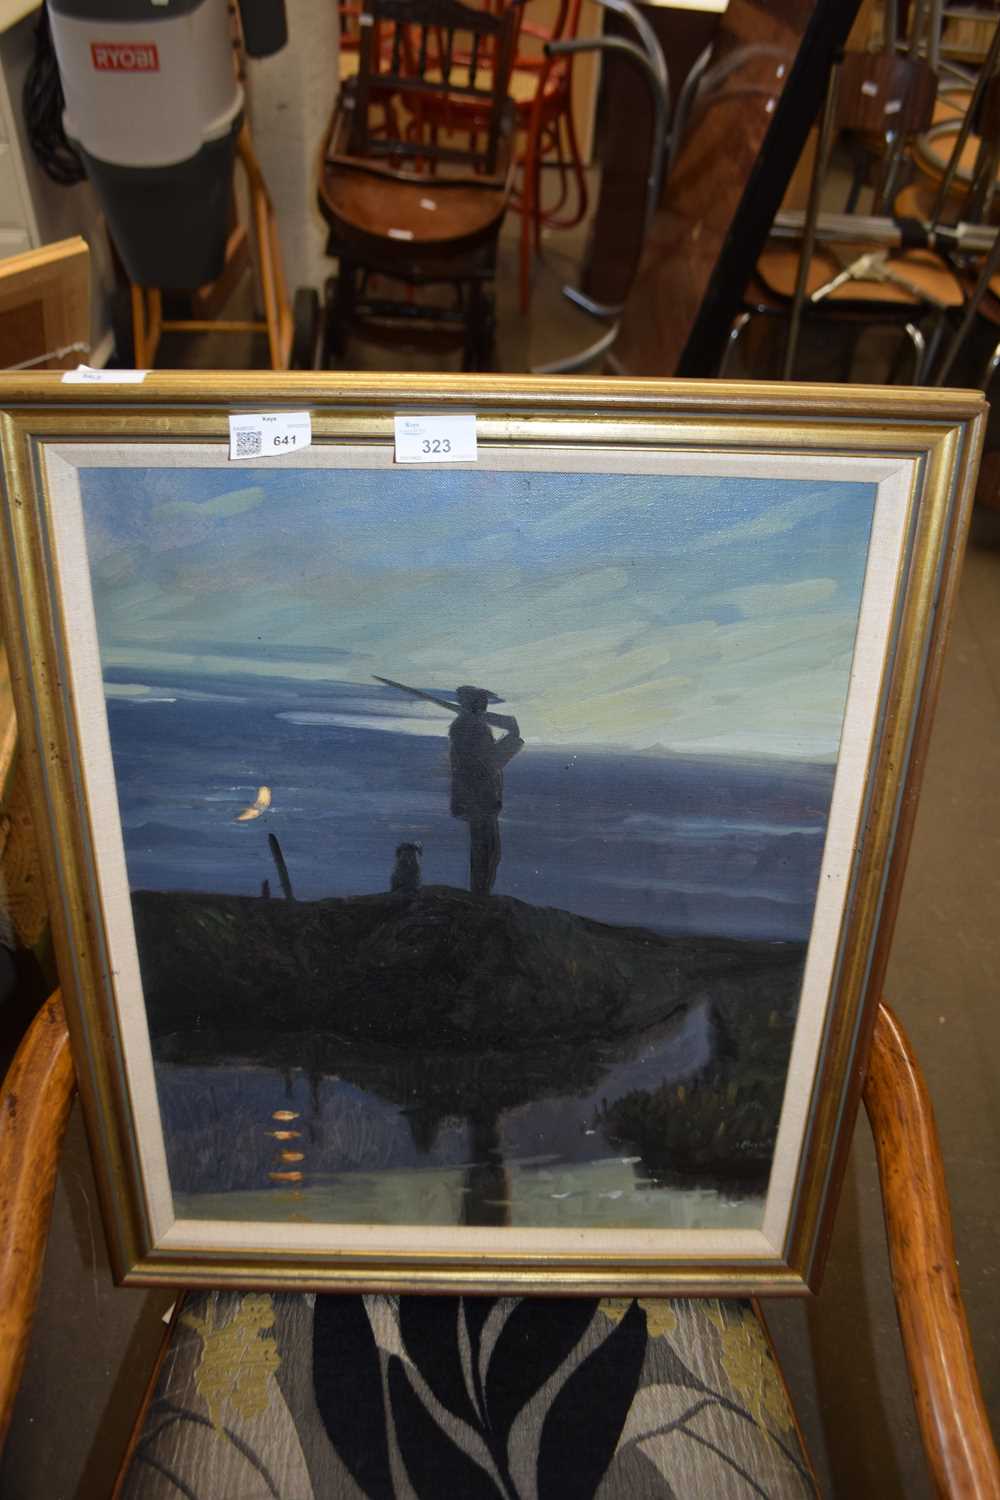 Lot 102 - British, Contemporary, Norfolk landscapes at...